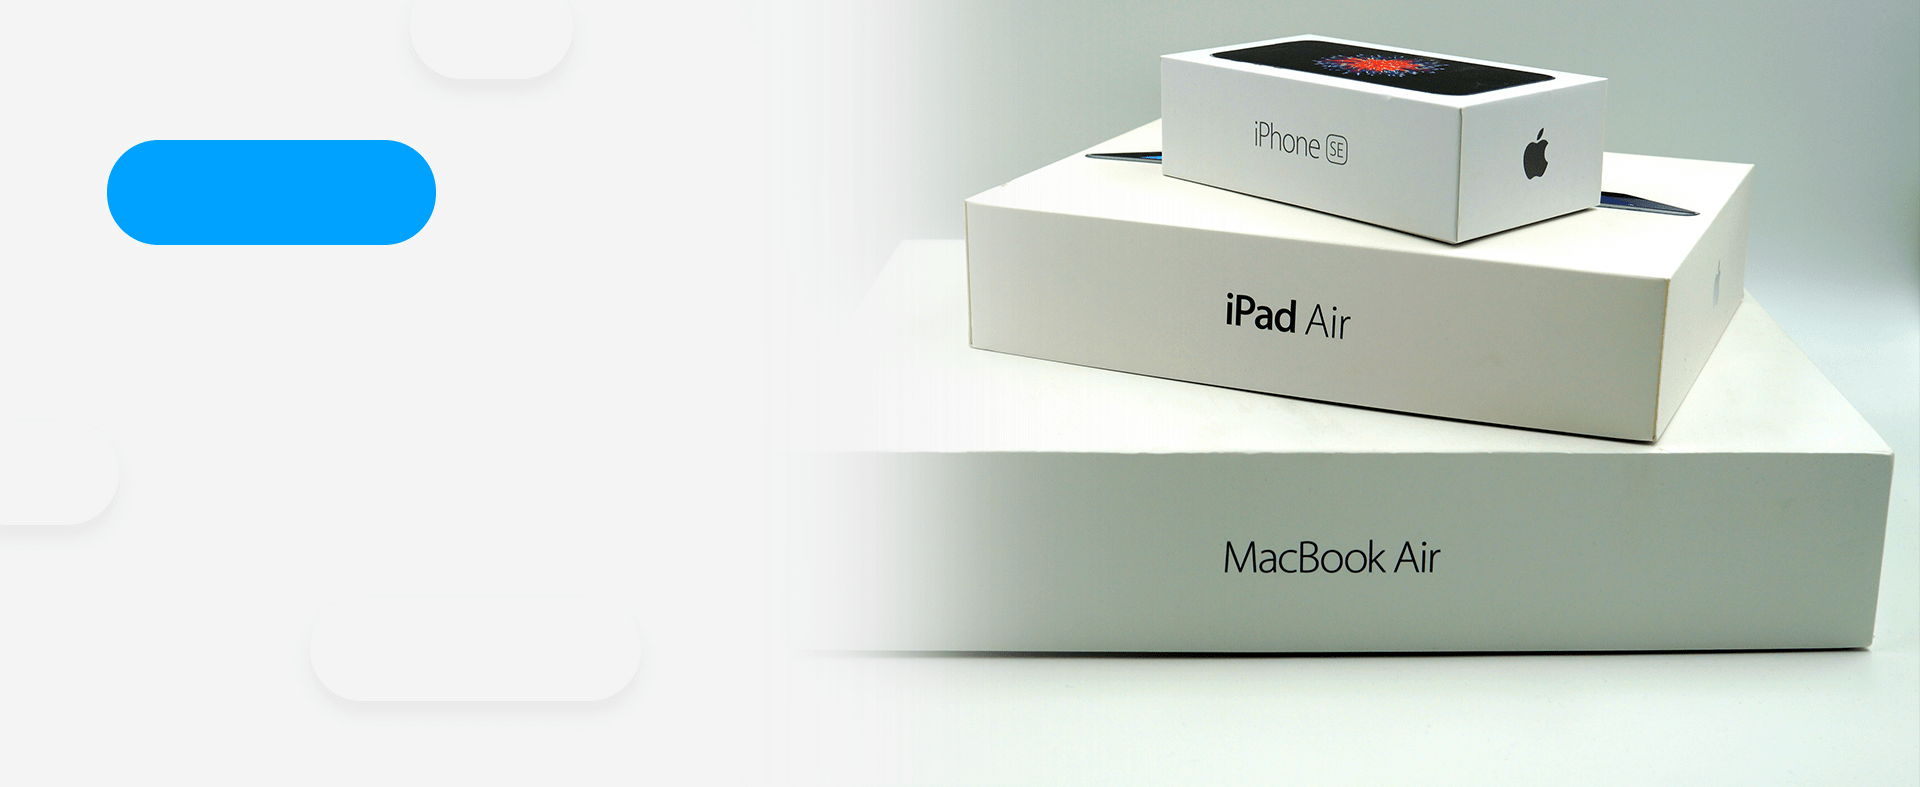 iphone packaging stacked up.